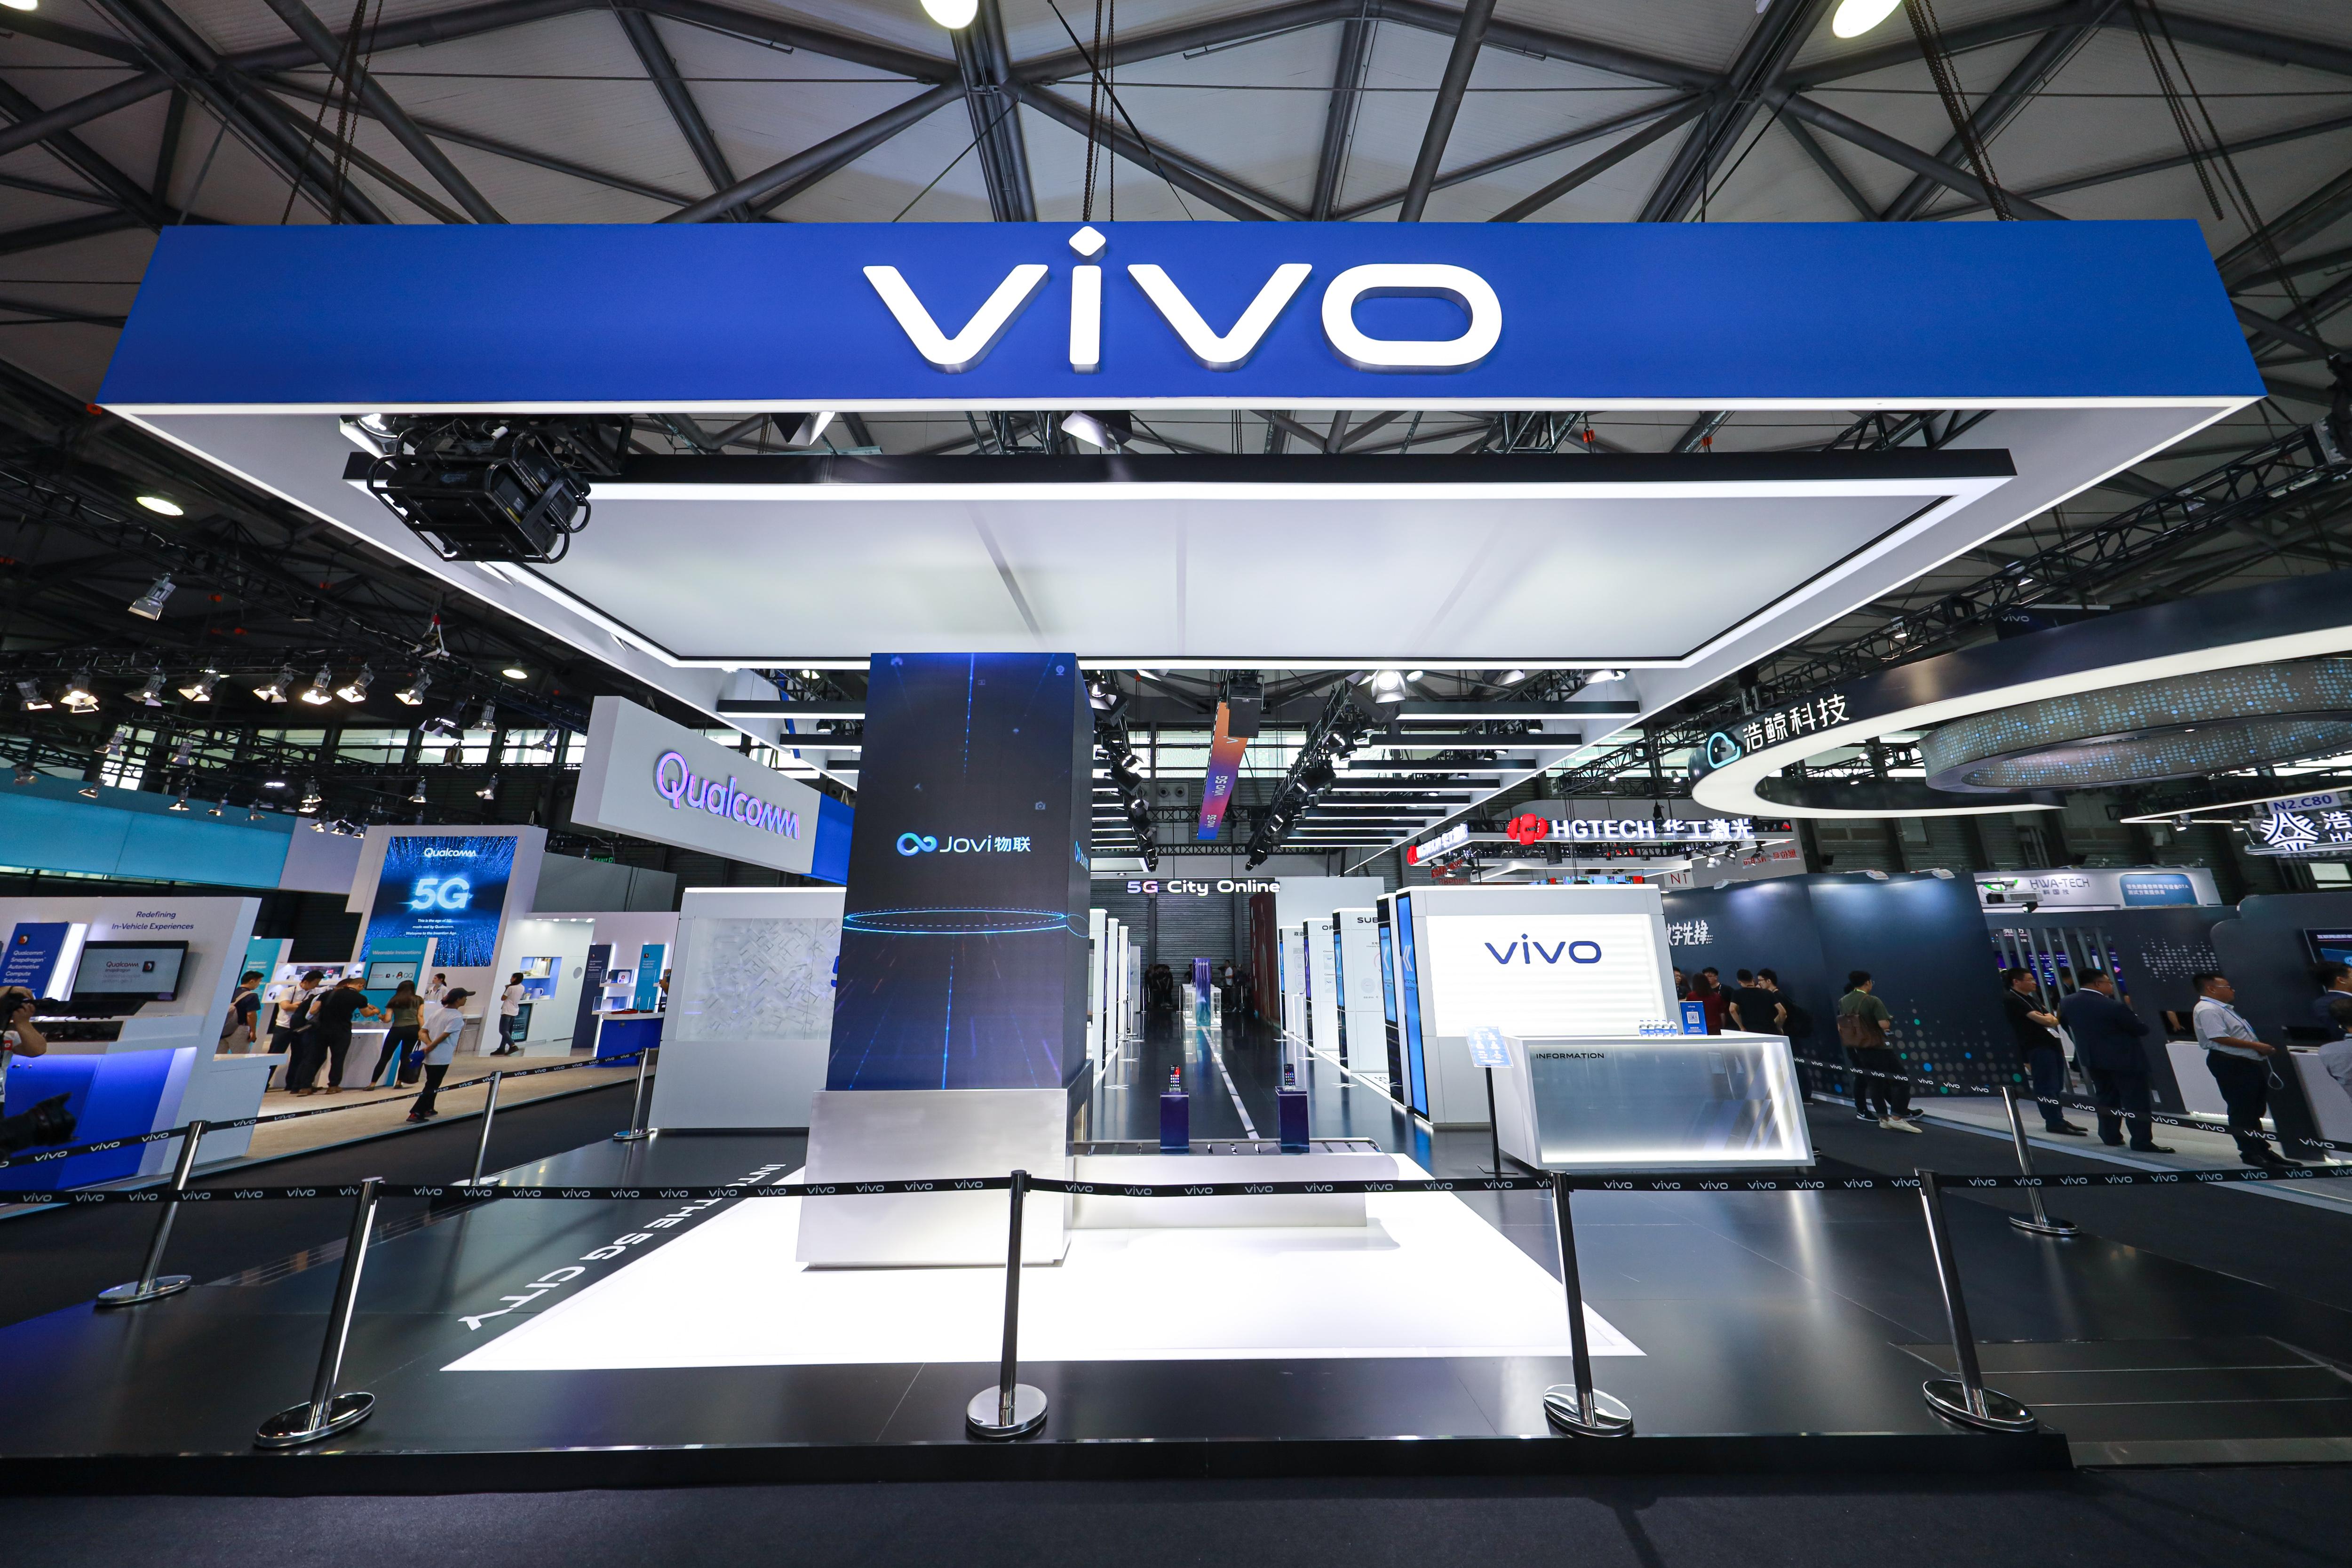 Vivo Unveils 5G-ready innovations, Vivo AR Glass and Super FlashCharge 120W at Mobile World Congress Shanghai 2019